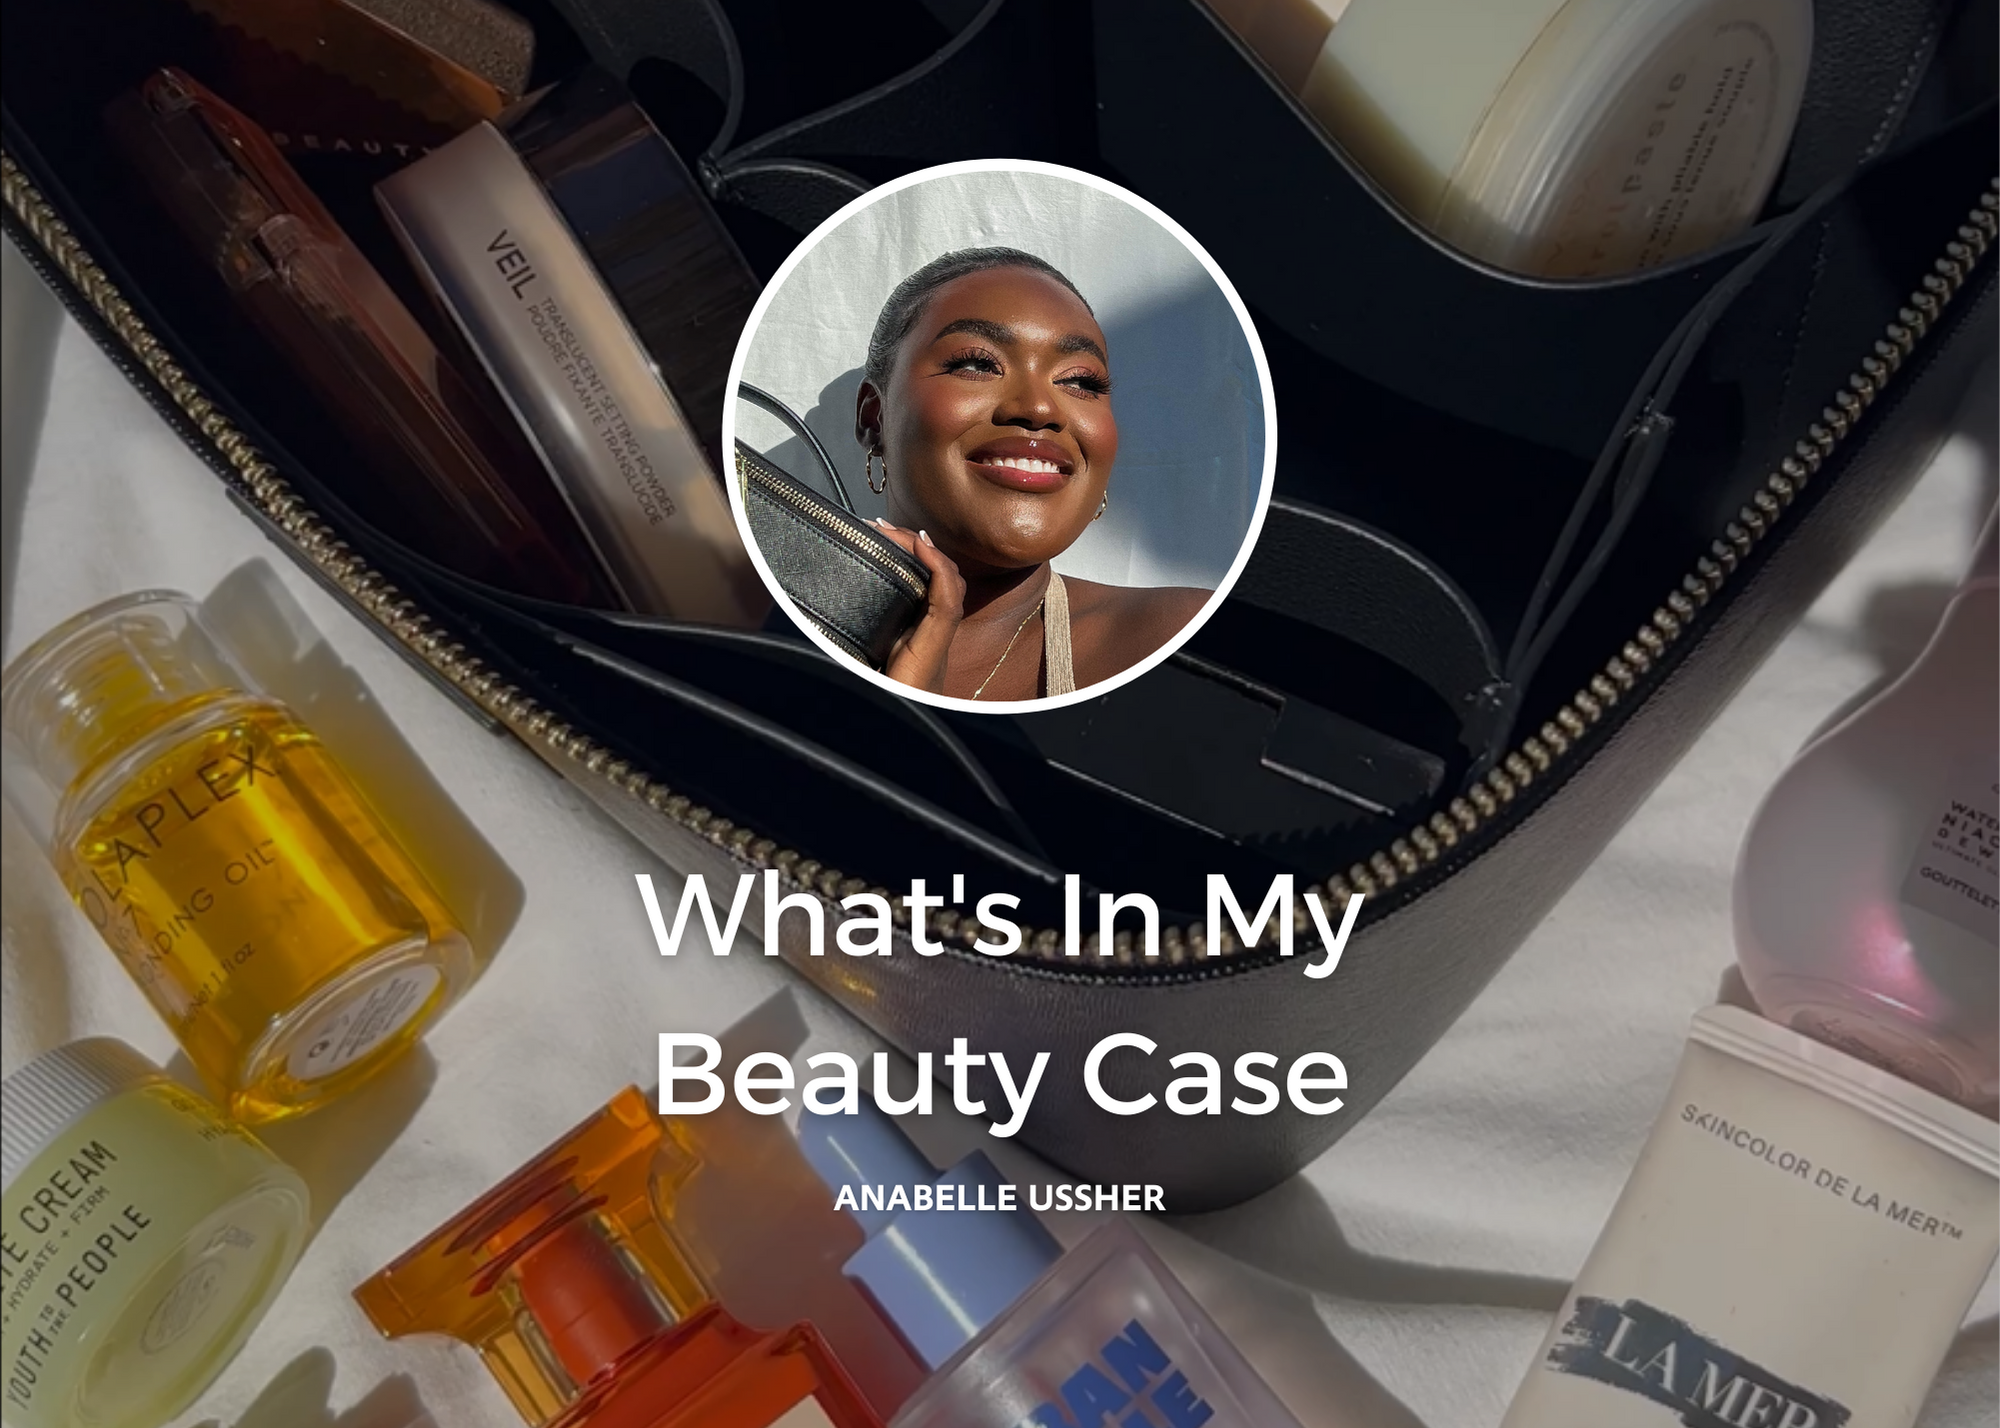 What's In My Beauty Case? By Anabelle Ussher